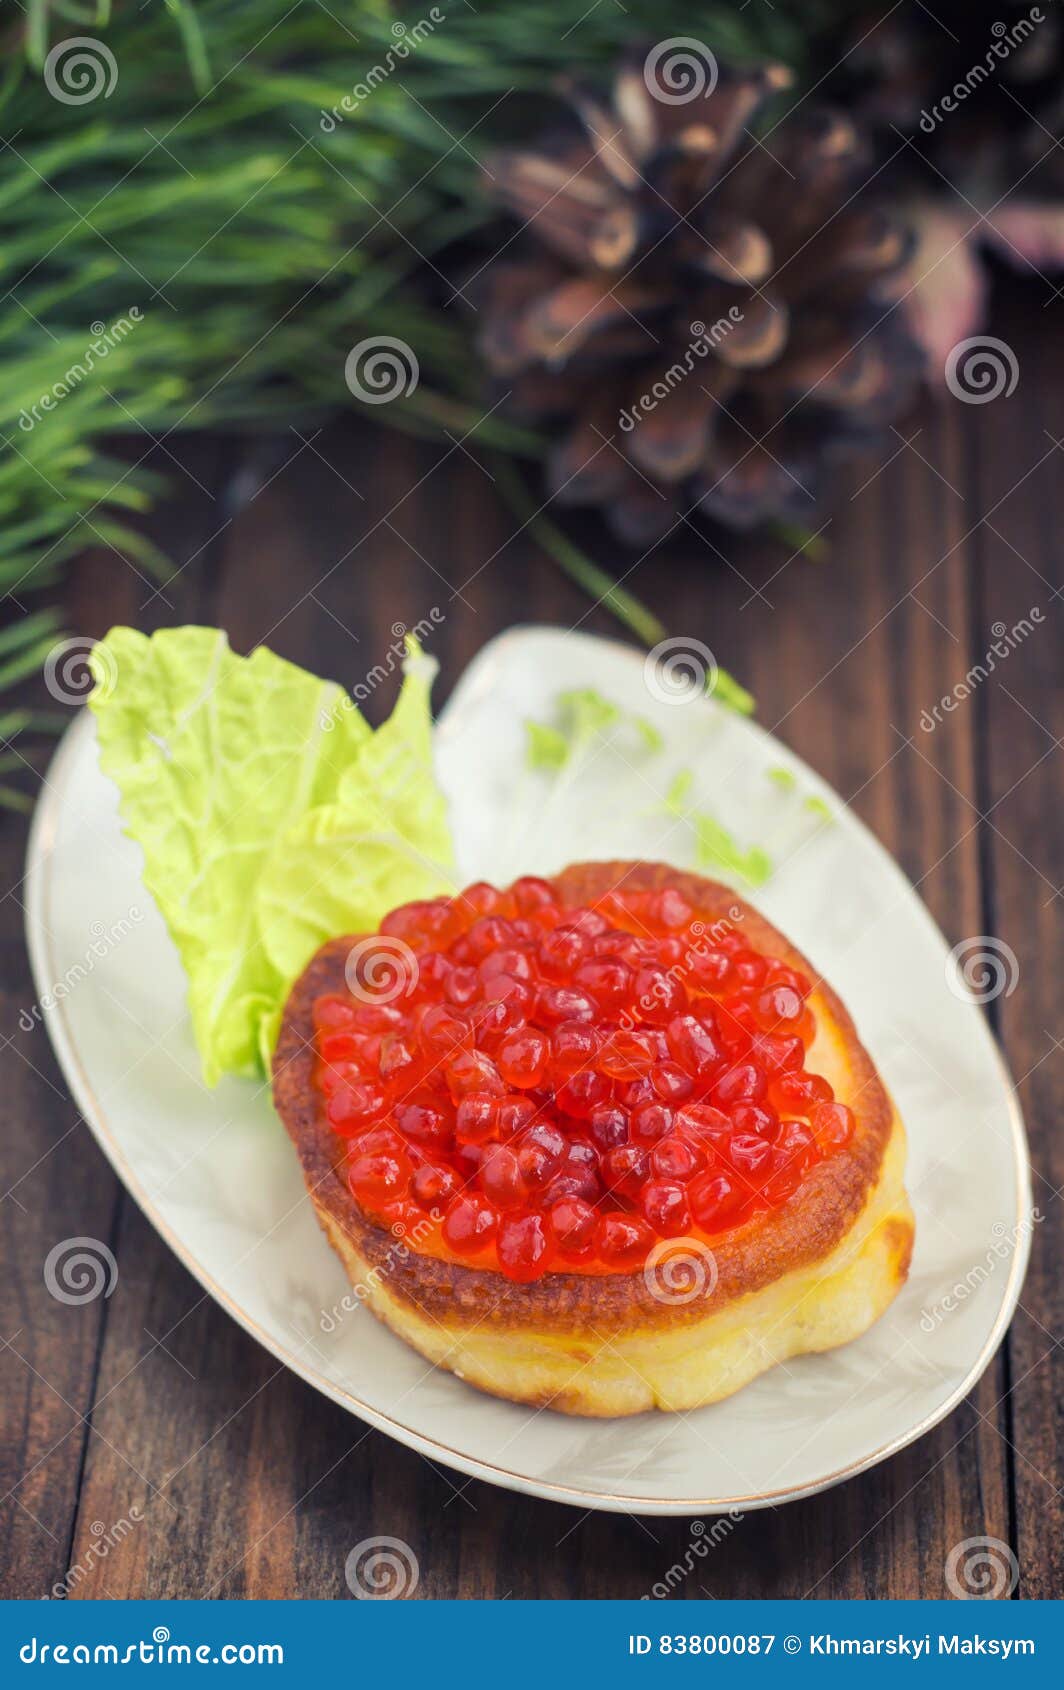 Healthy Appetizer : Sandwich with Red Caviar on White China Plate ...